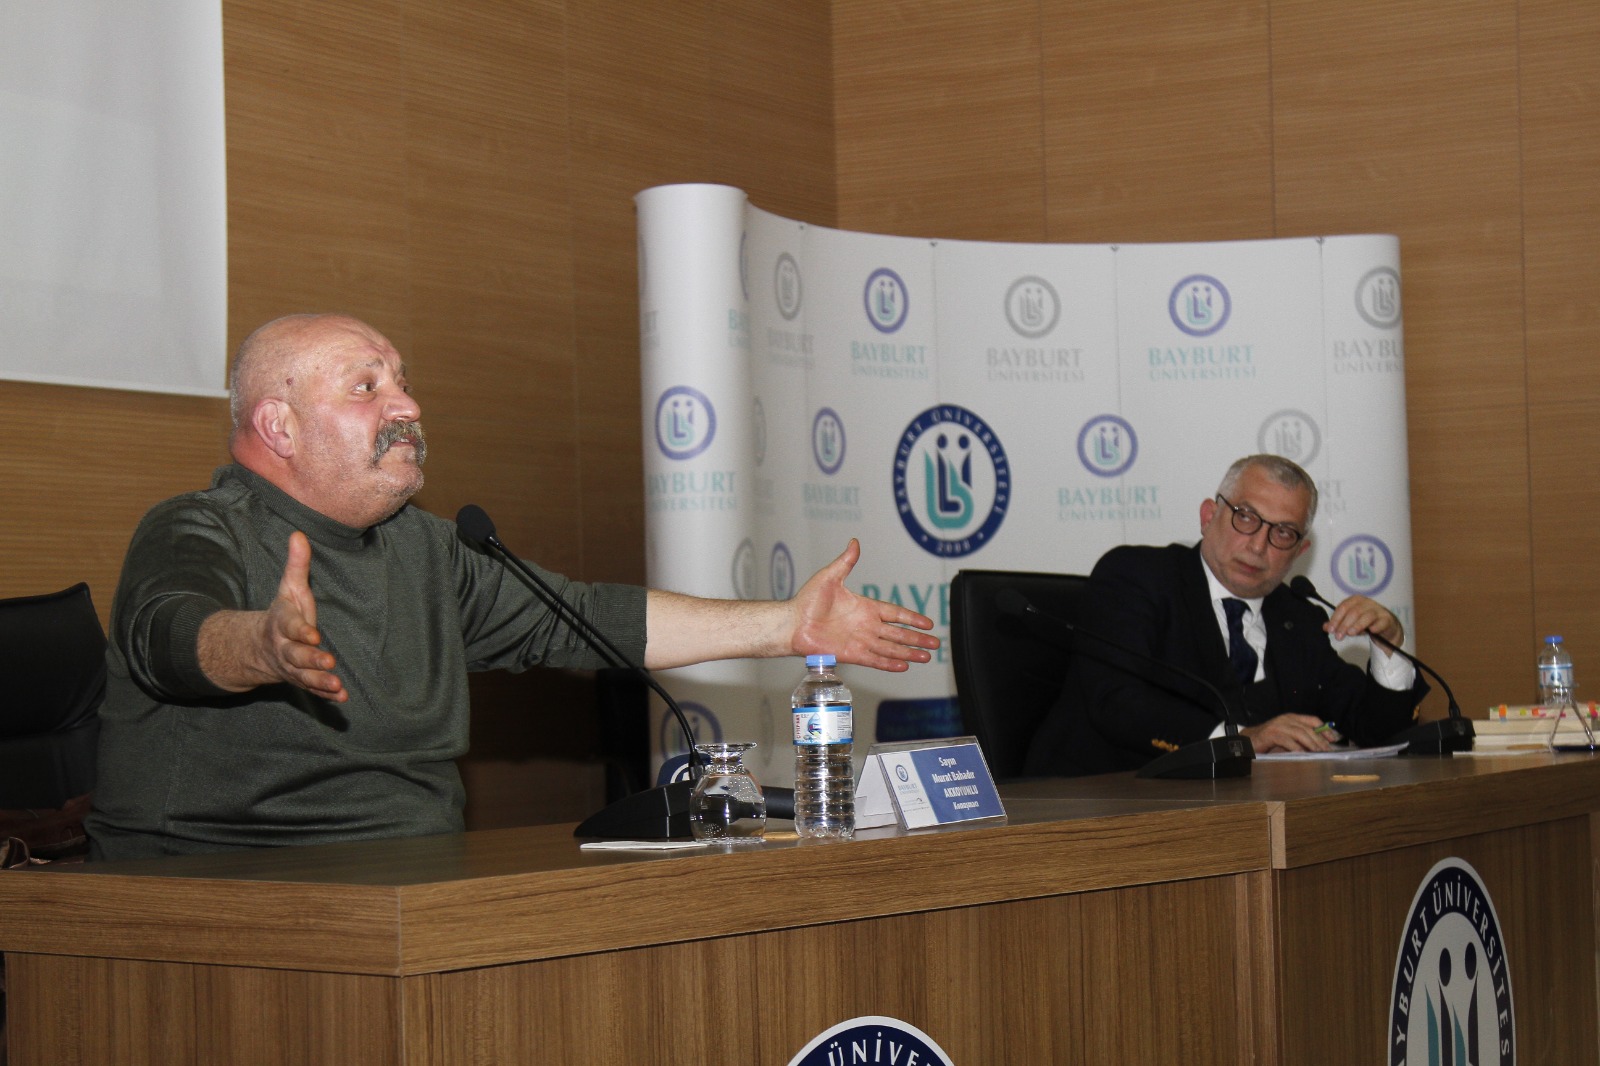 The Conference Titled "Where Does the World Go,  What Does Turkey Do?" was held in Our University